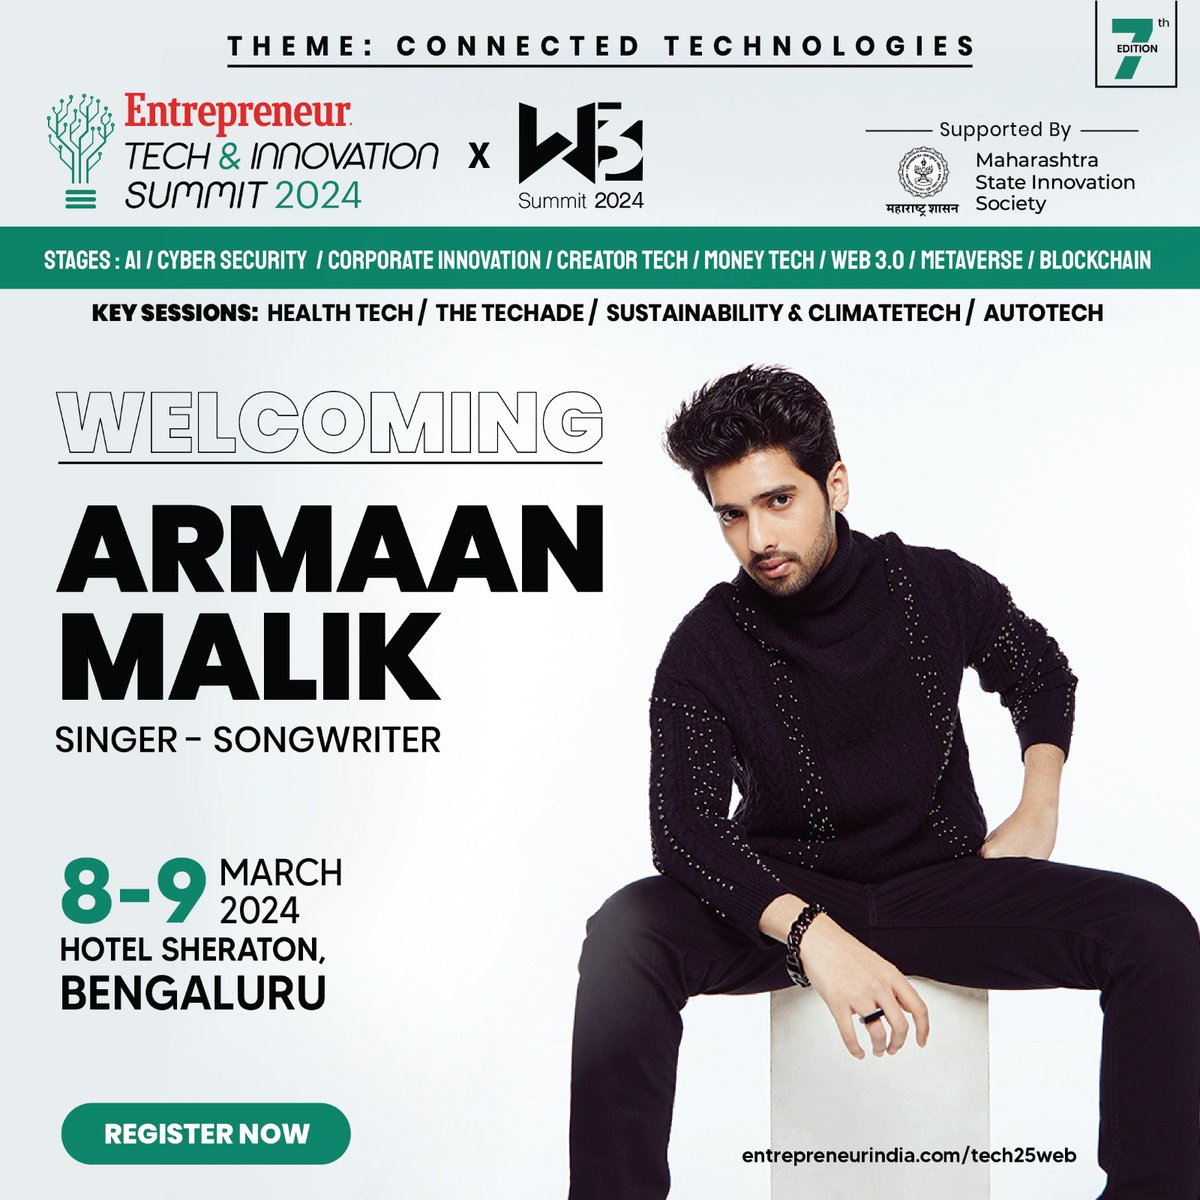 🔥 Thrilled to unveil legendary Singer-Songwriter, Armaan Malik, as a guest celebrity of the Tech & Innovation Summit!

📅 08-09 March 2024 📅 , Hotel Sheraton, Bengaluru

🎶🌟 Register here- ow.ly/Bzoz50QH5oJ

#TechInnovationSummit  #EntrepreneurIndia #ArmaanMalik